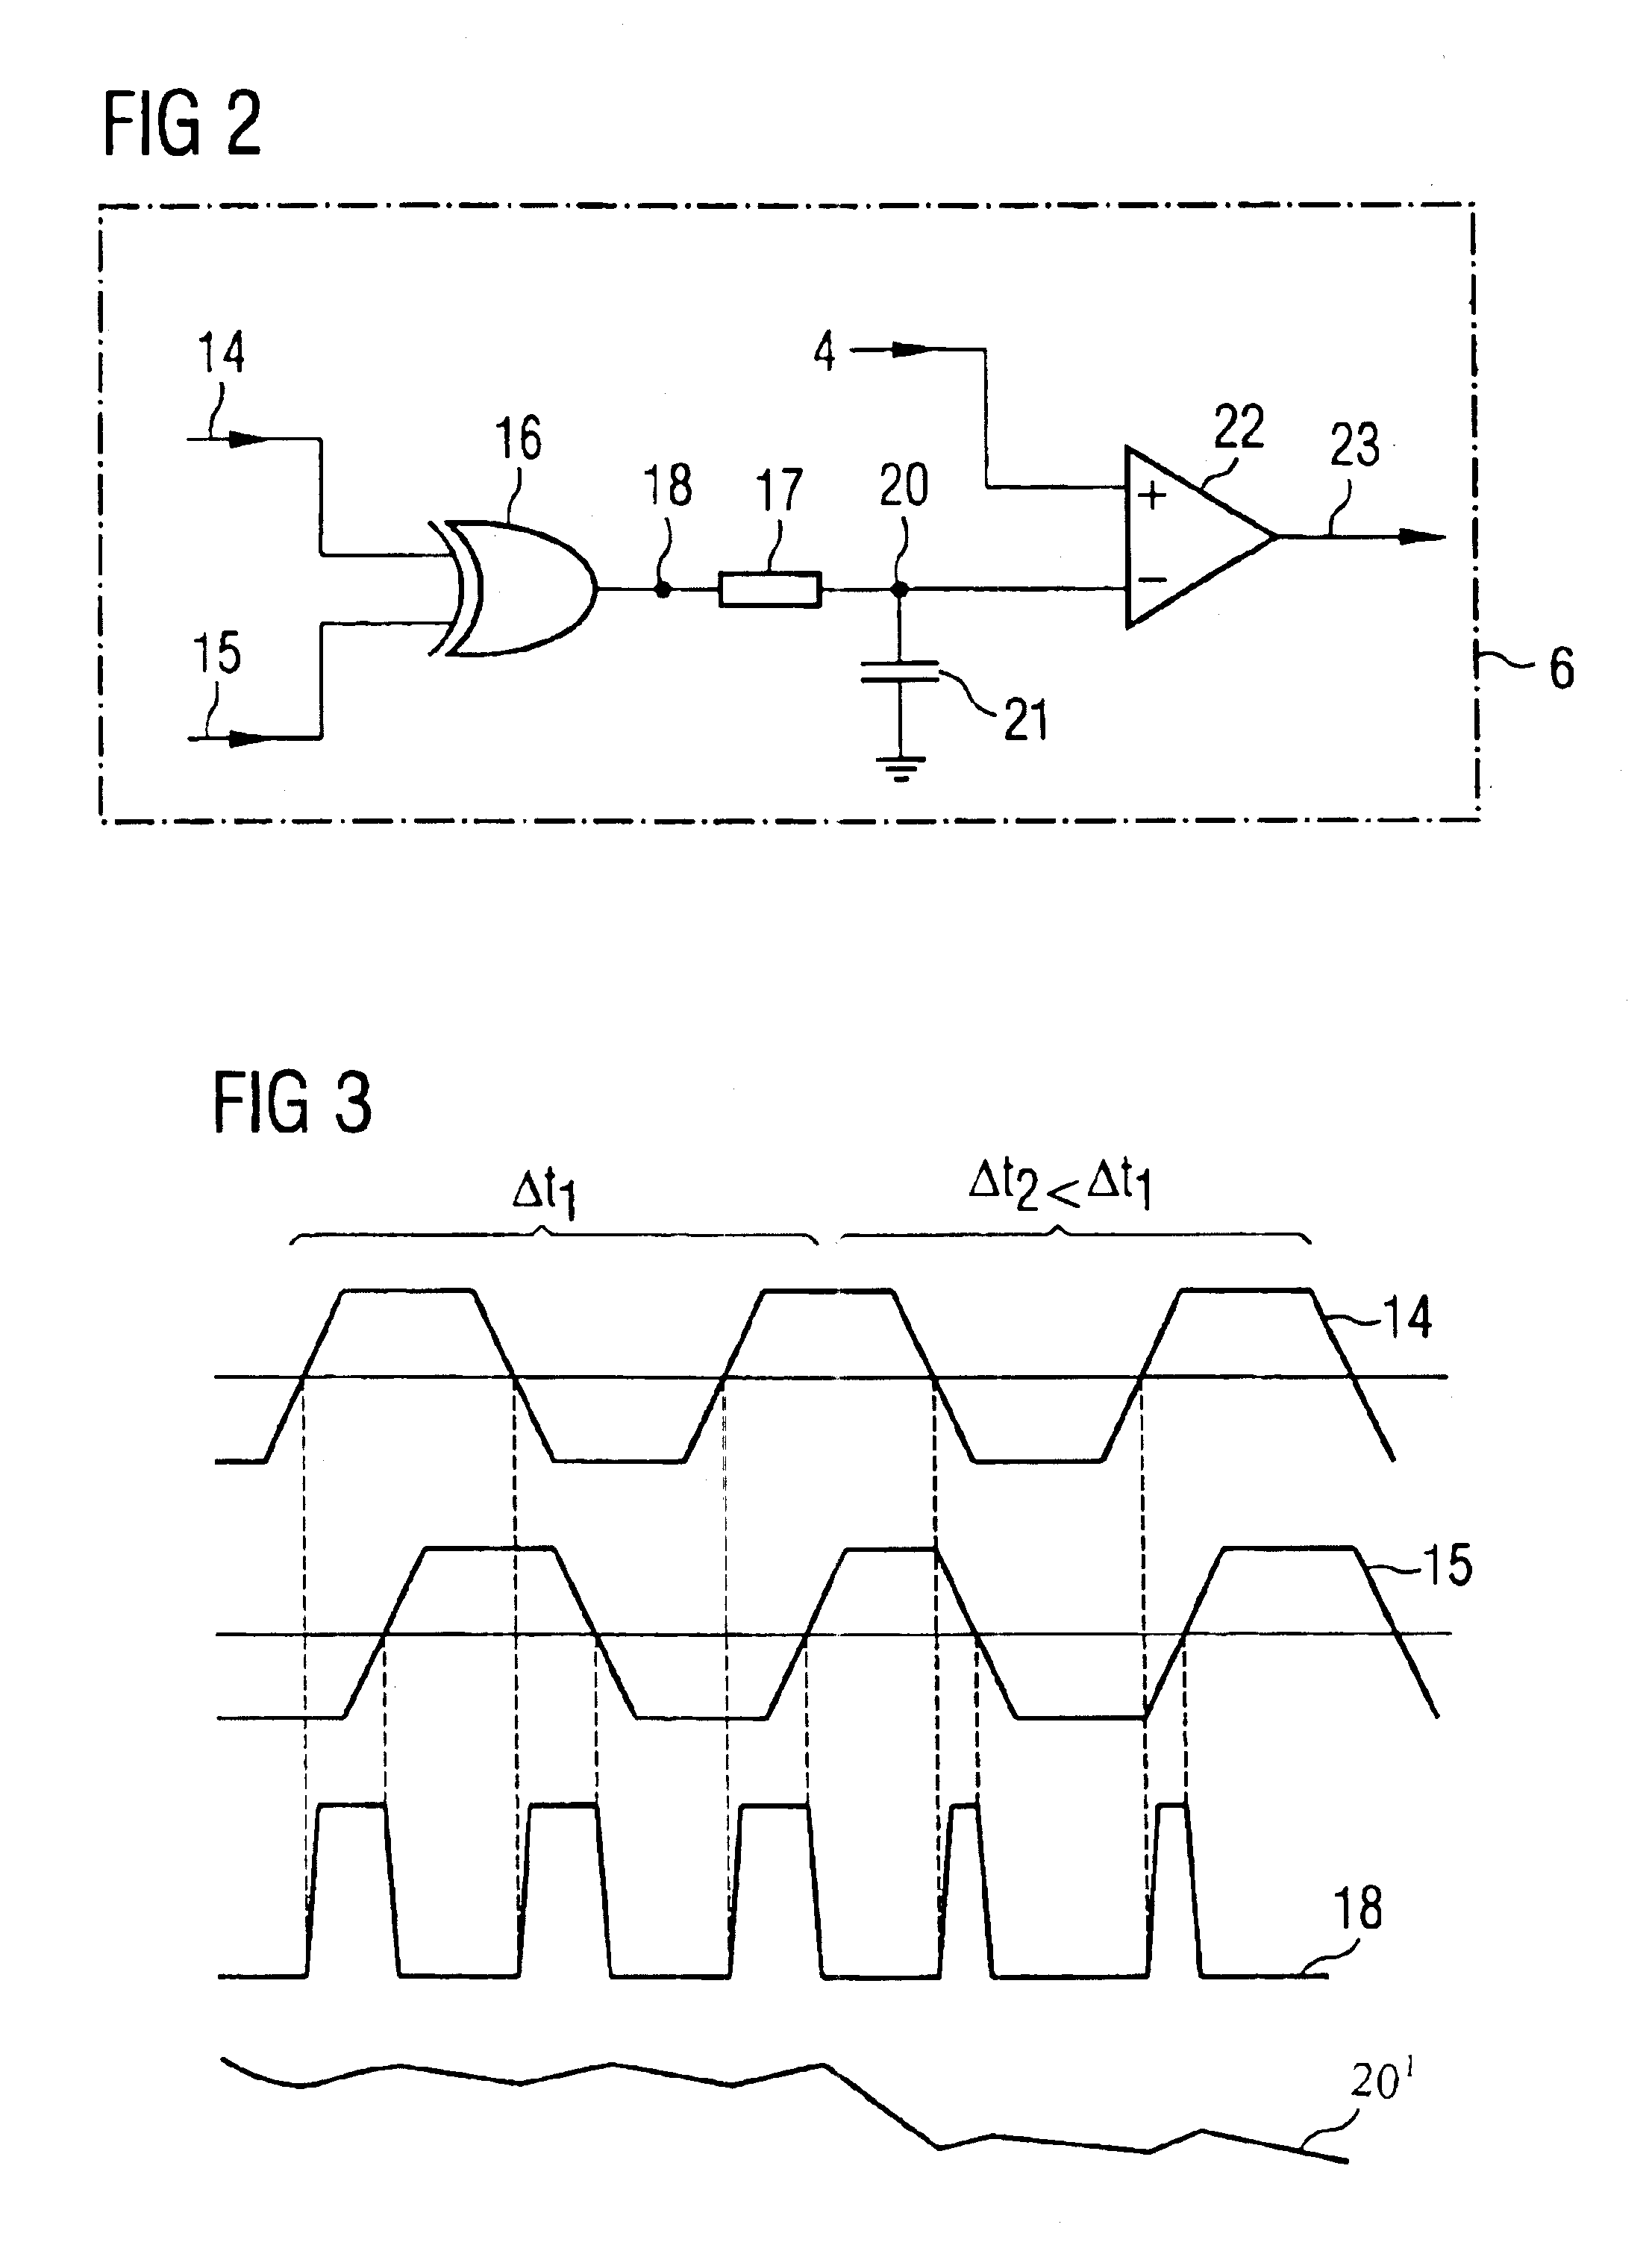 Buffer amplifier architecture for semiconductor memory circuits